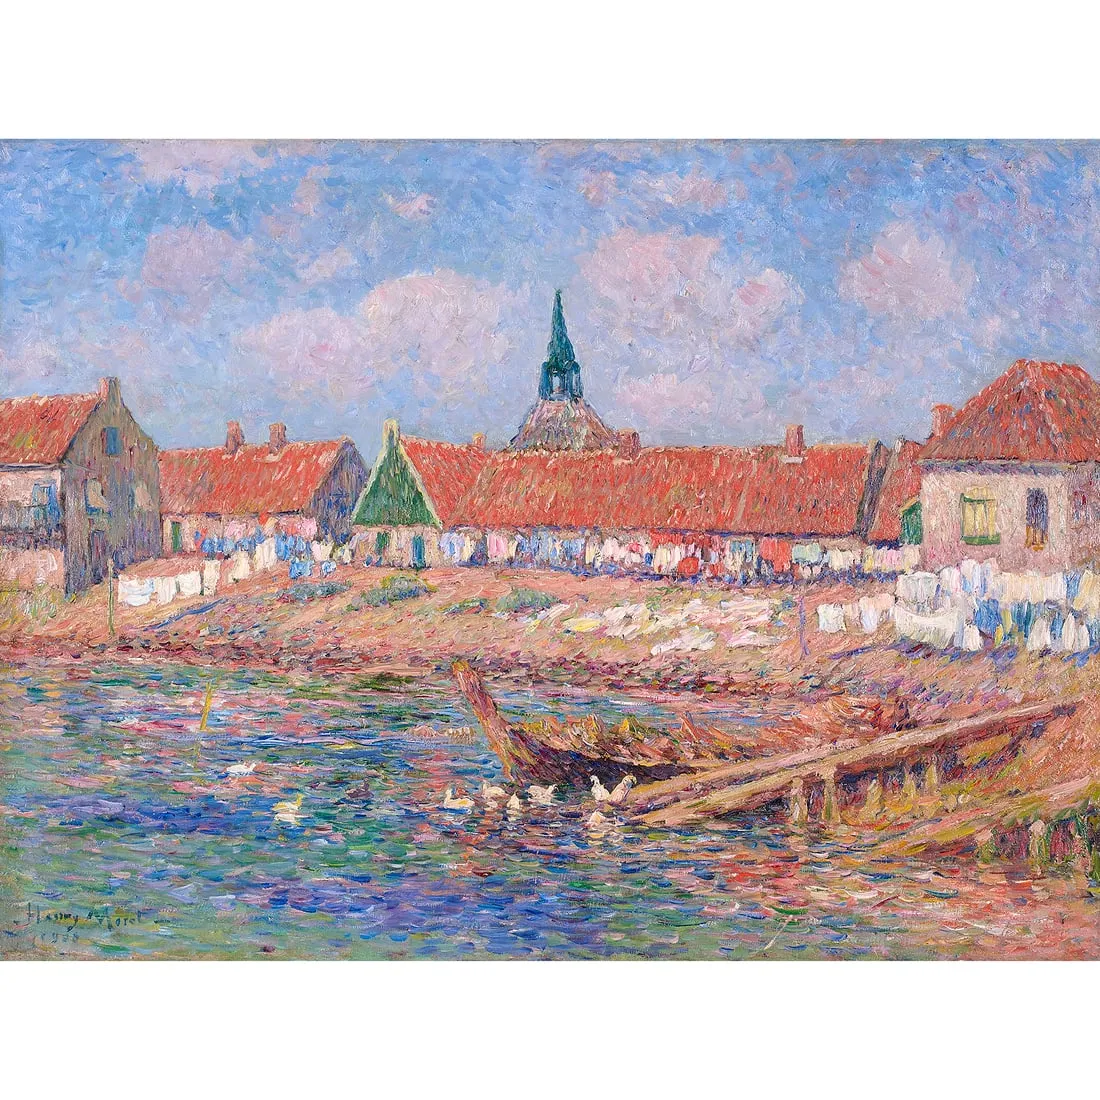 Henry Moret Dutch coastal scene graces Fall Modern and Contemporary Art sale at Clars Sept. 14-15